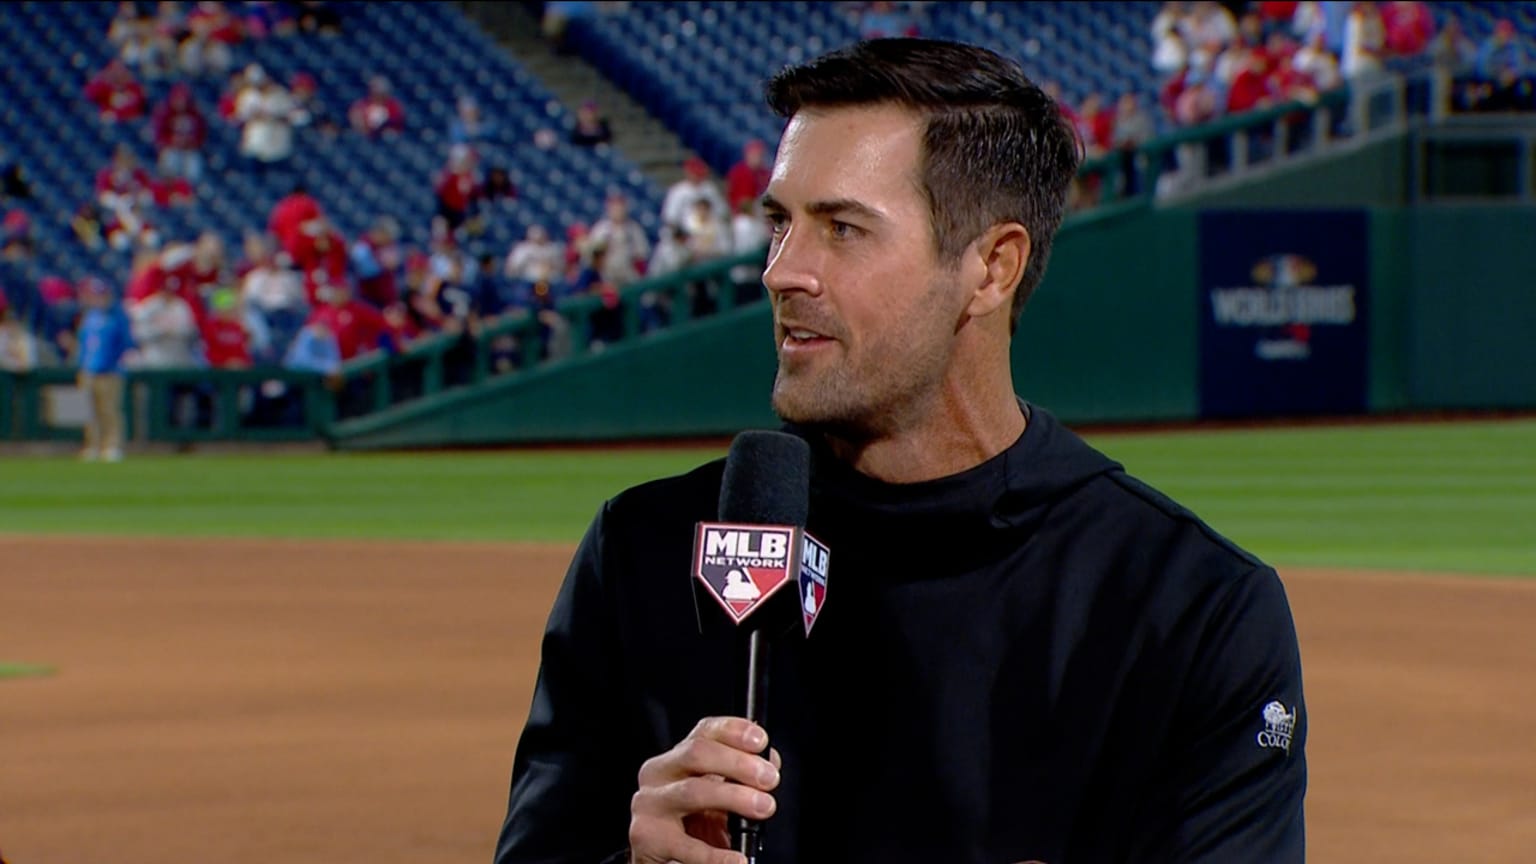 Phillies World Series hero Cole Hamels placed on retirement list, ending  15-year career